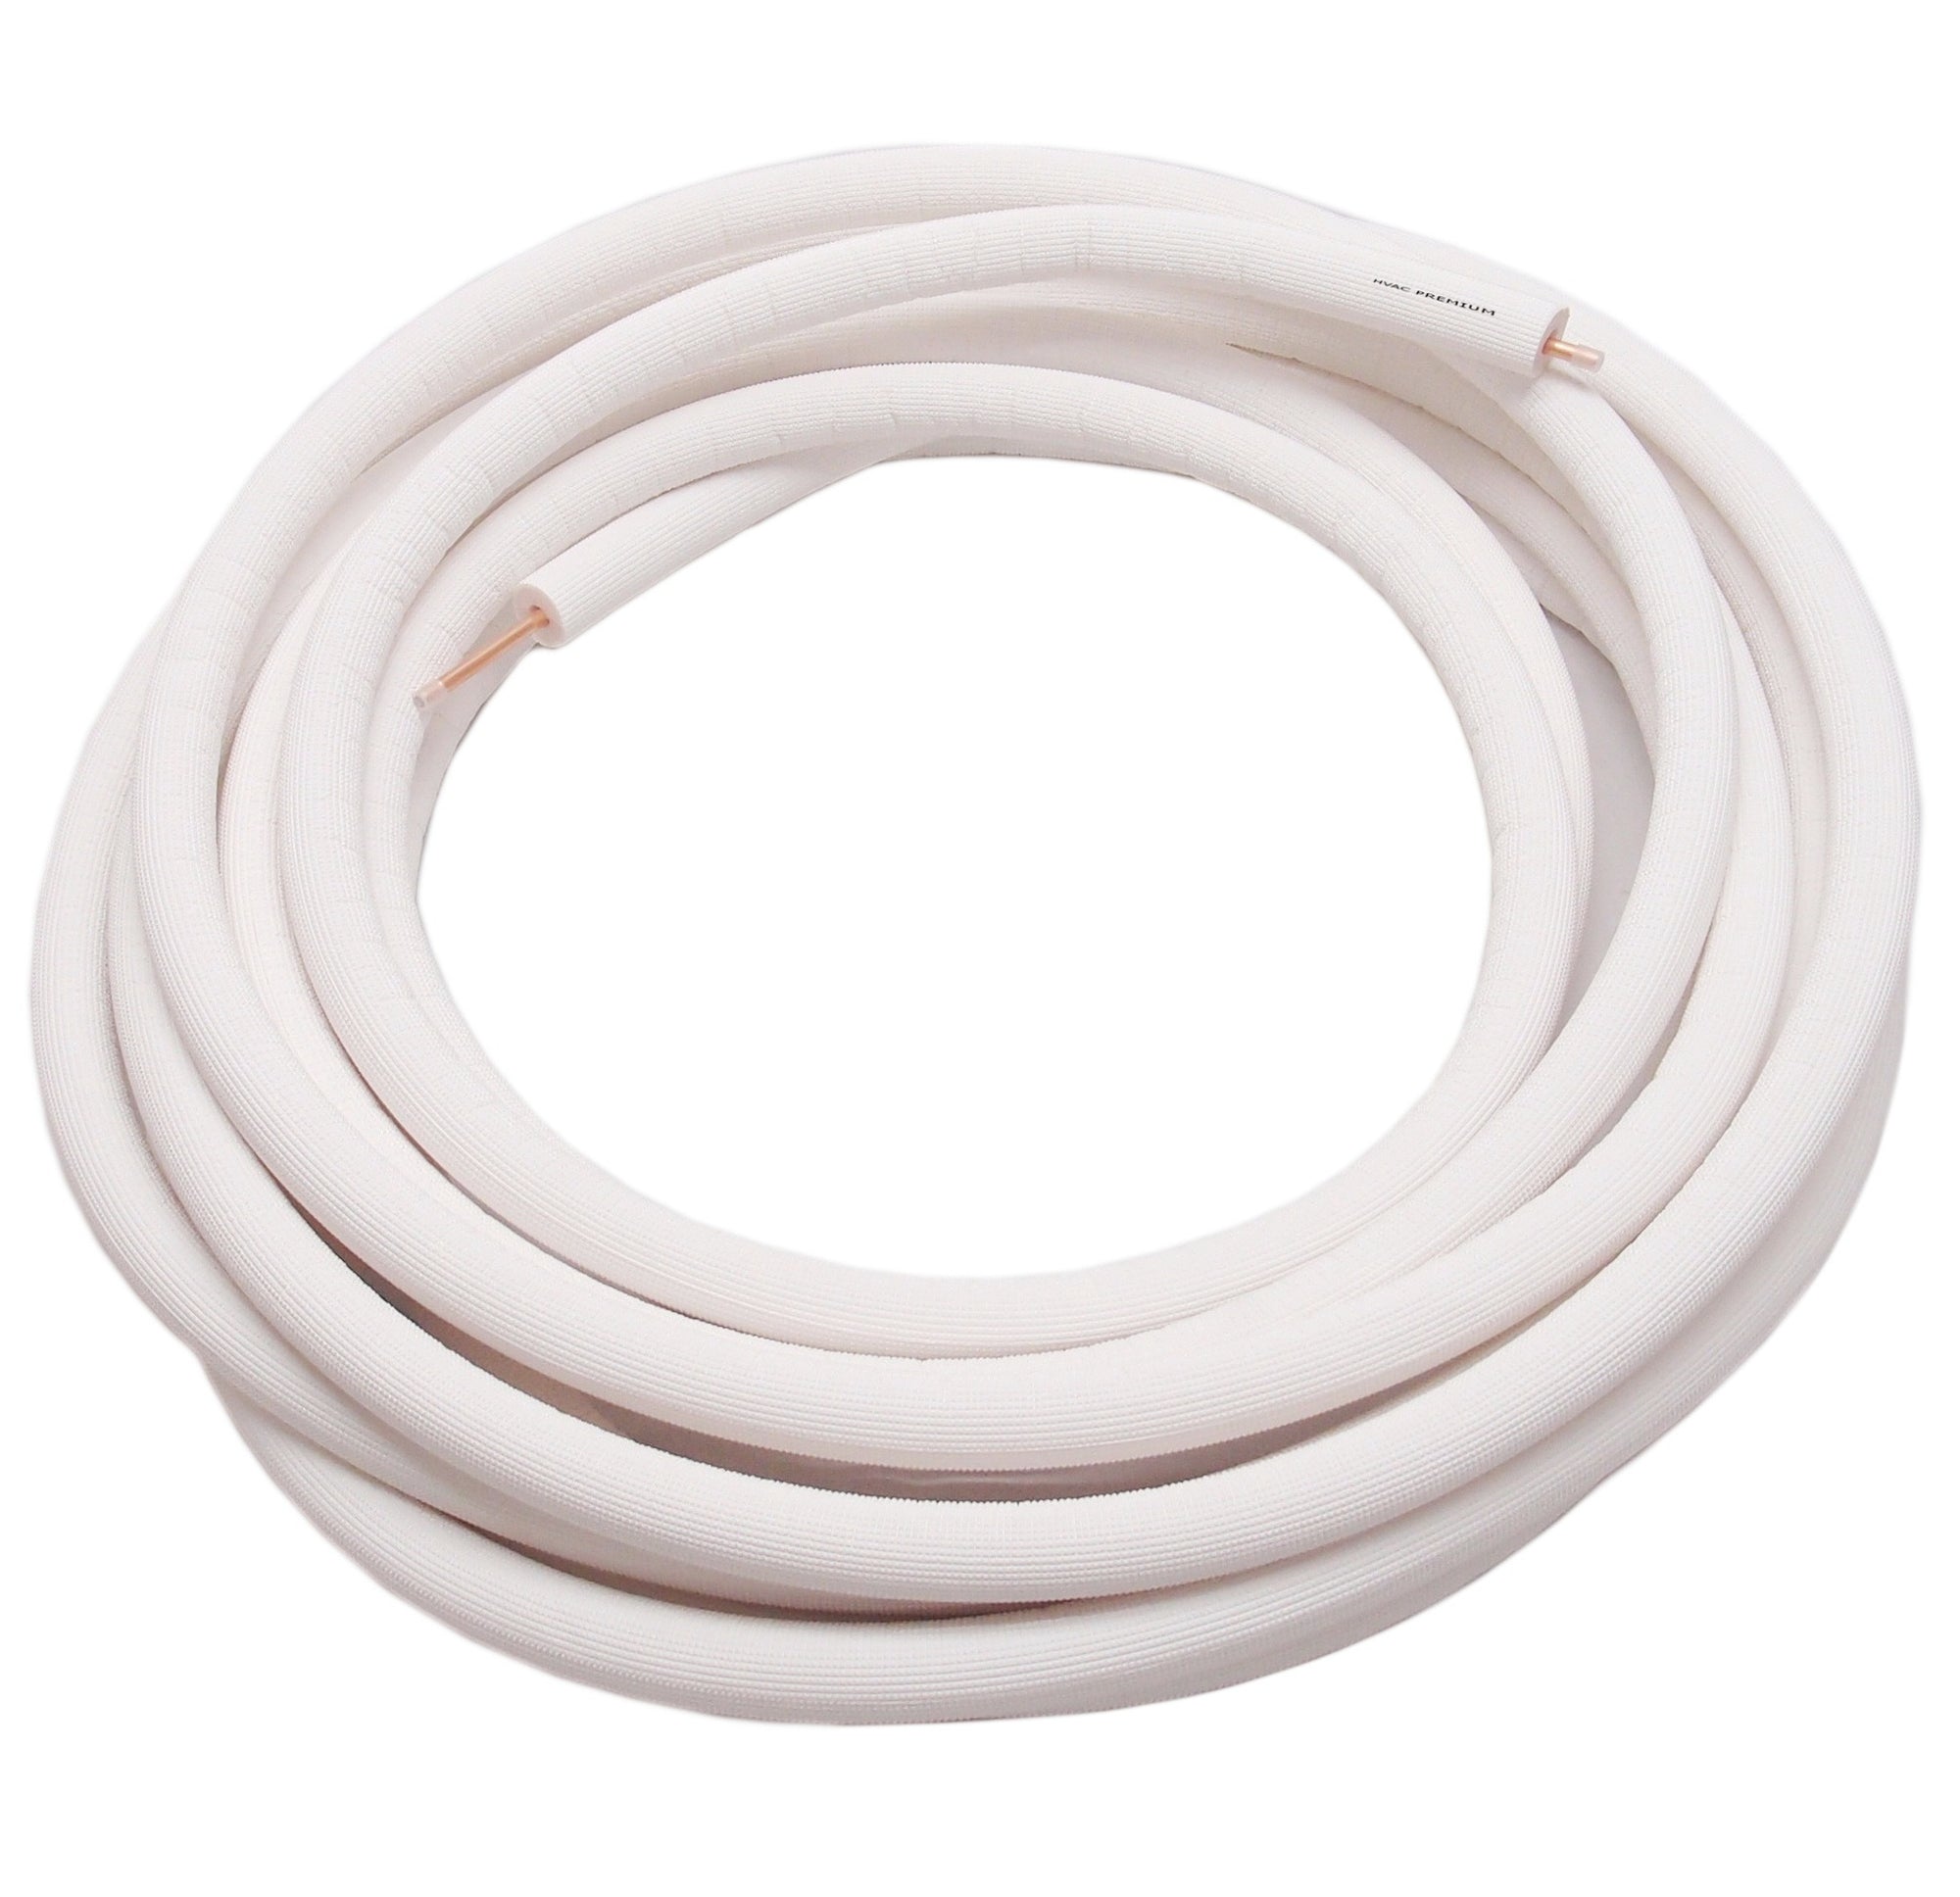 5/8" Insulated Copper Coil Line - Seamless Pipe Tube for HVAC, Refrigerant - 1/2" White Insulation - 50' Long